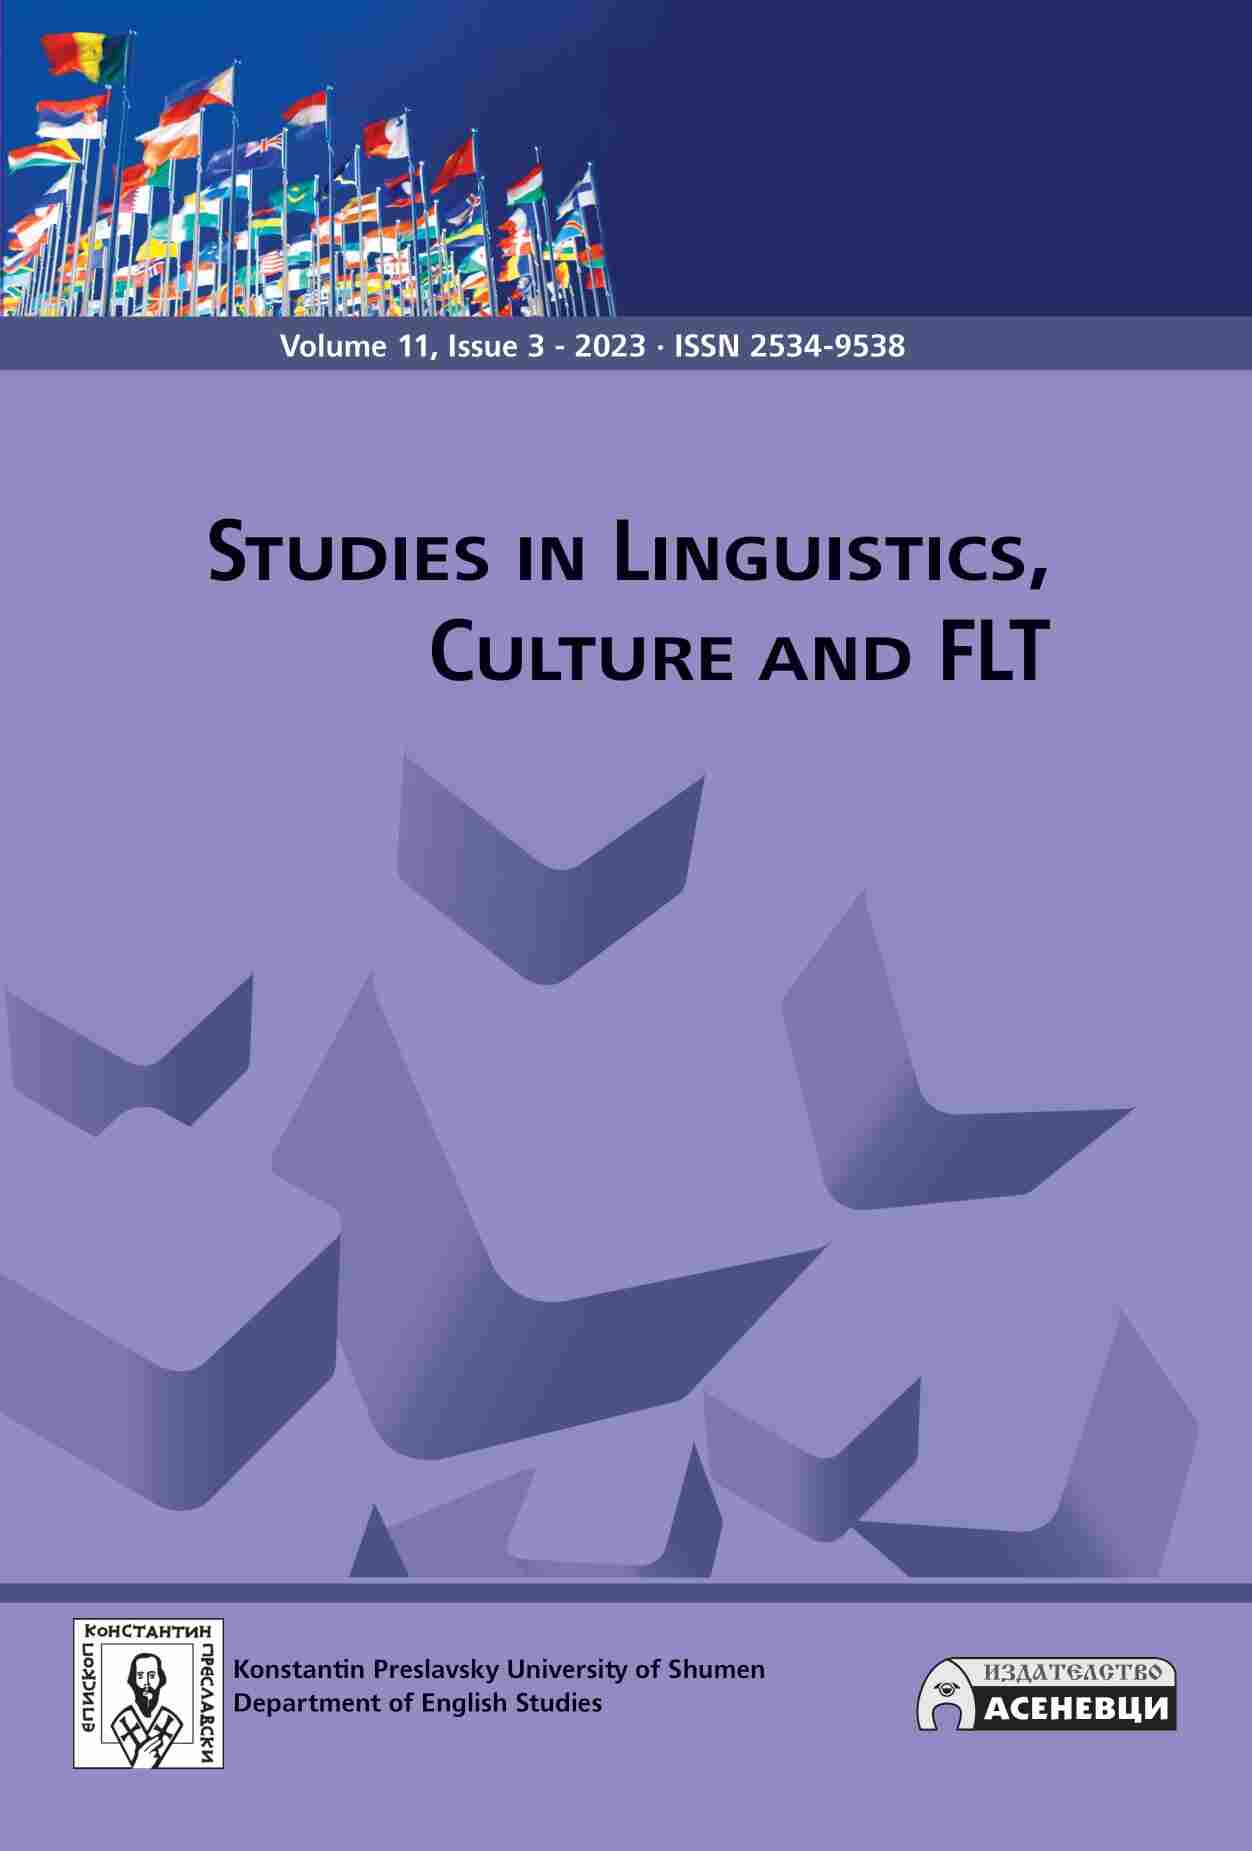 Educational technology (EdTech) in English as a foreign language (EFL) in Bangladesh: Necessities, innovations, and implications